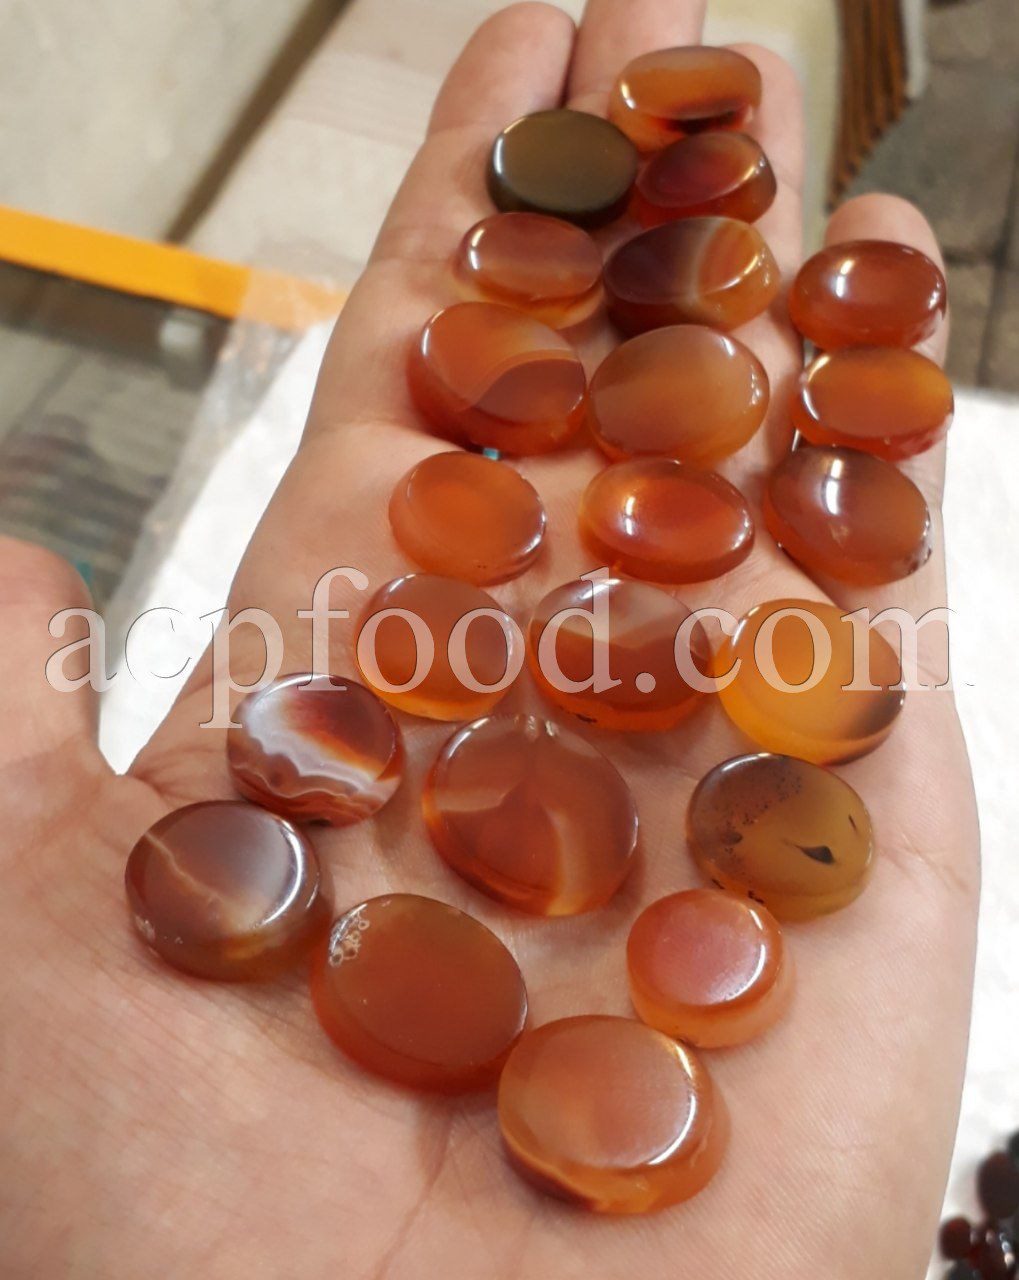 Agate for sale.